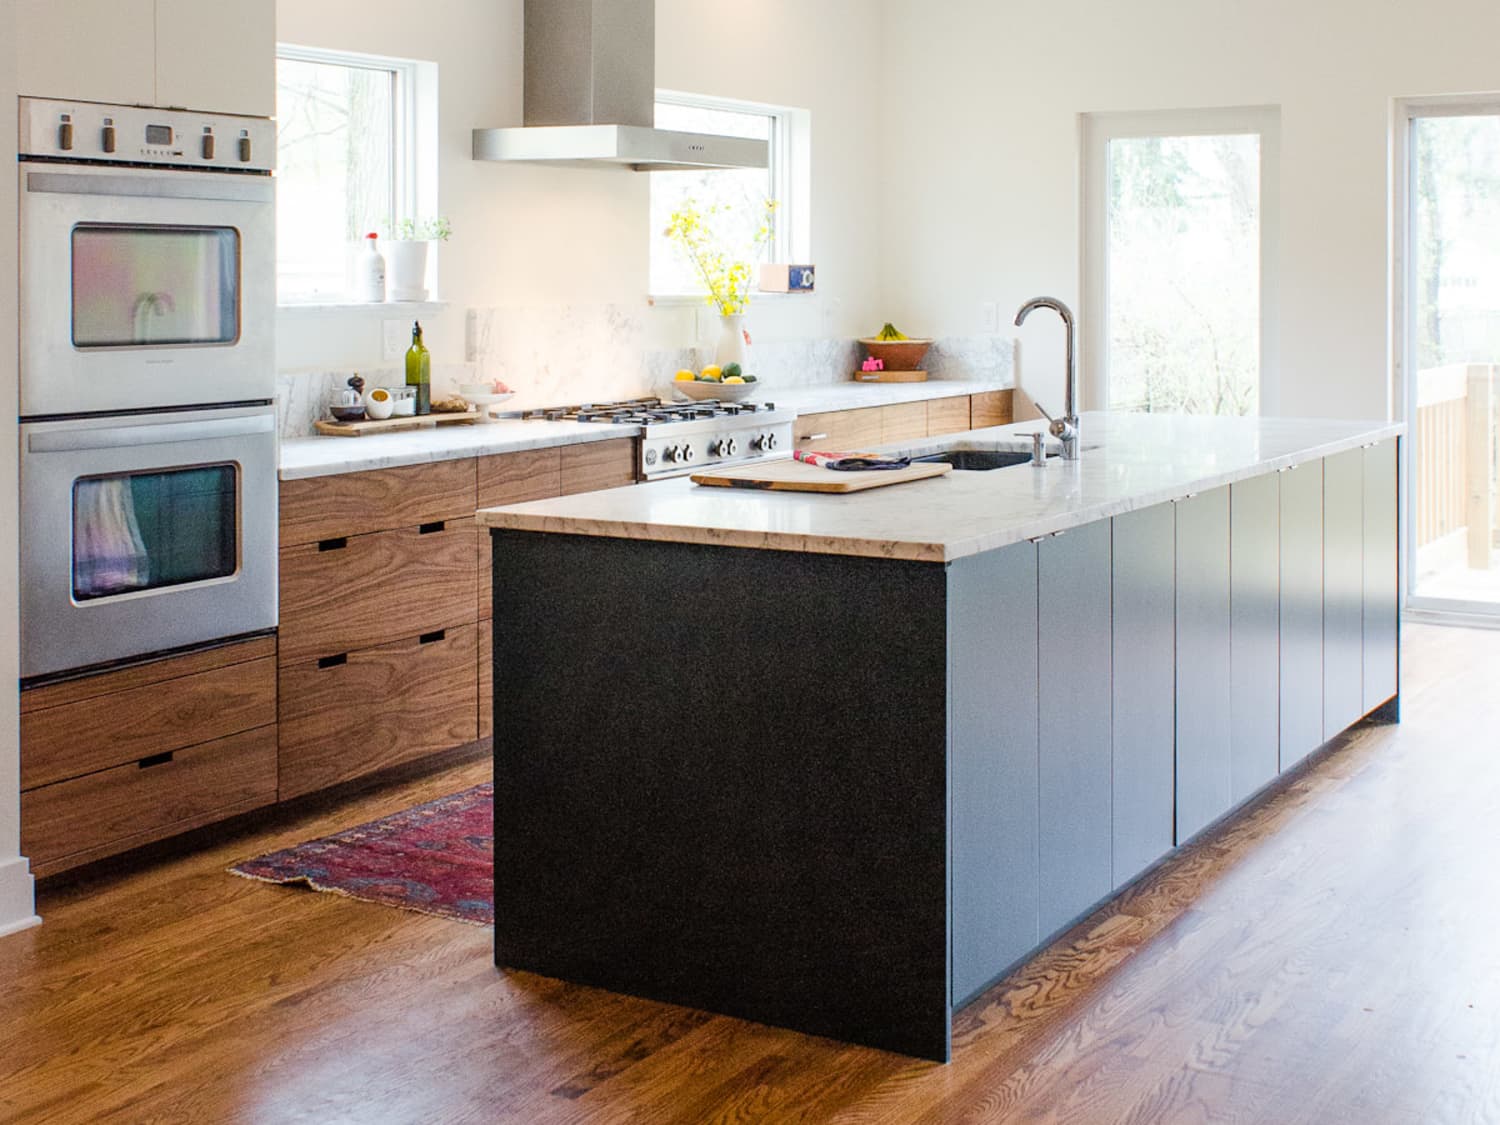 ikea kitchen cabinets: pros, cons & reviews | apartment therapy